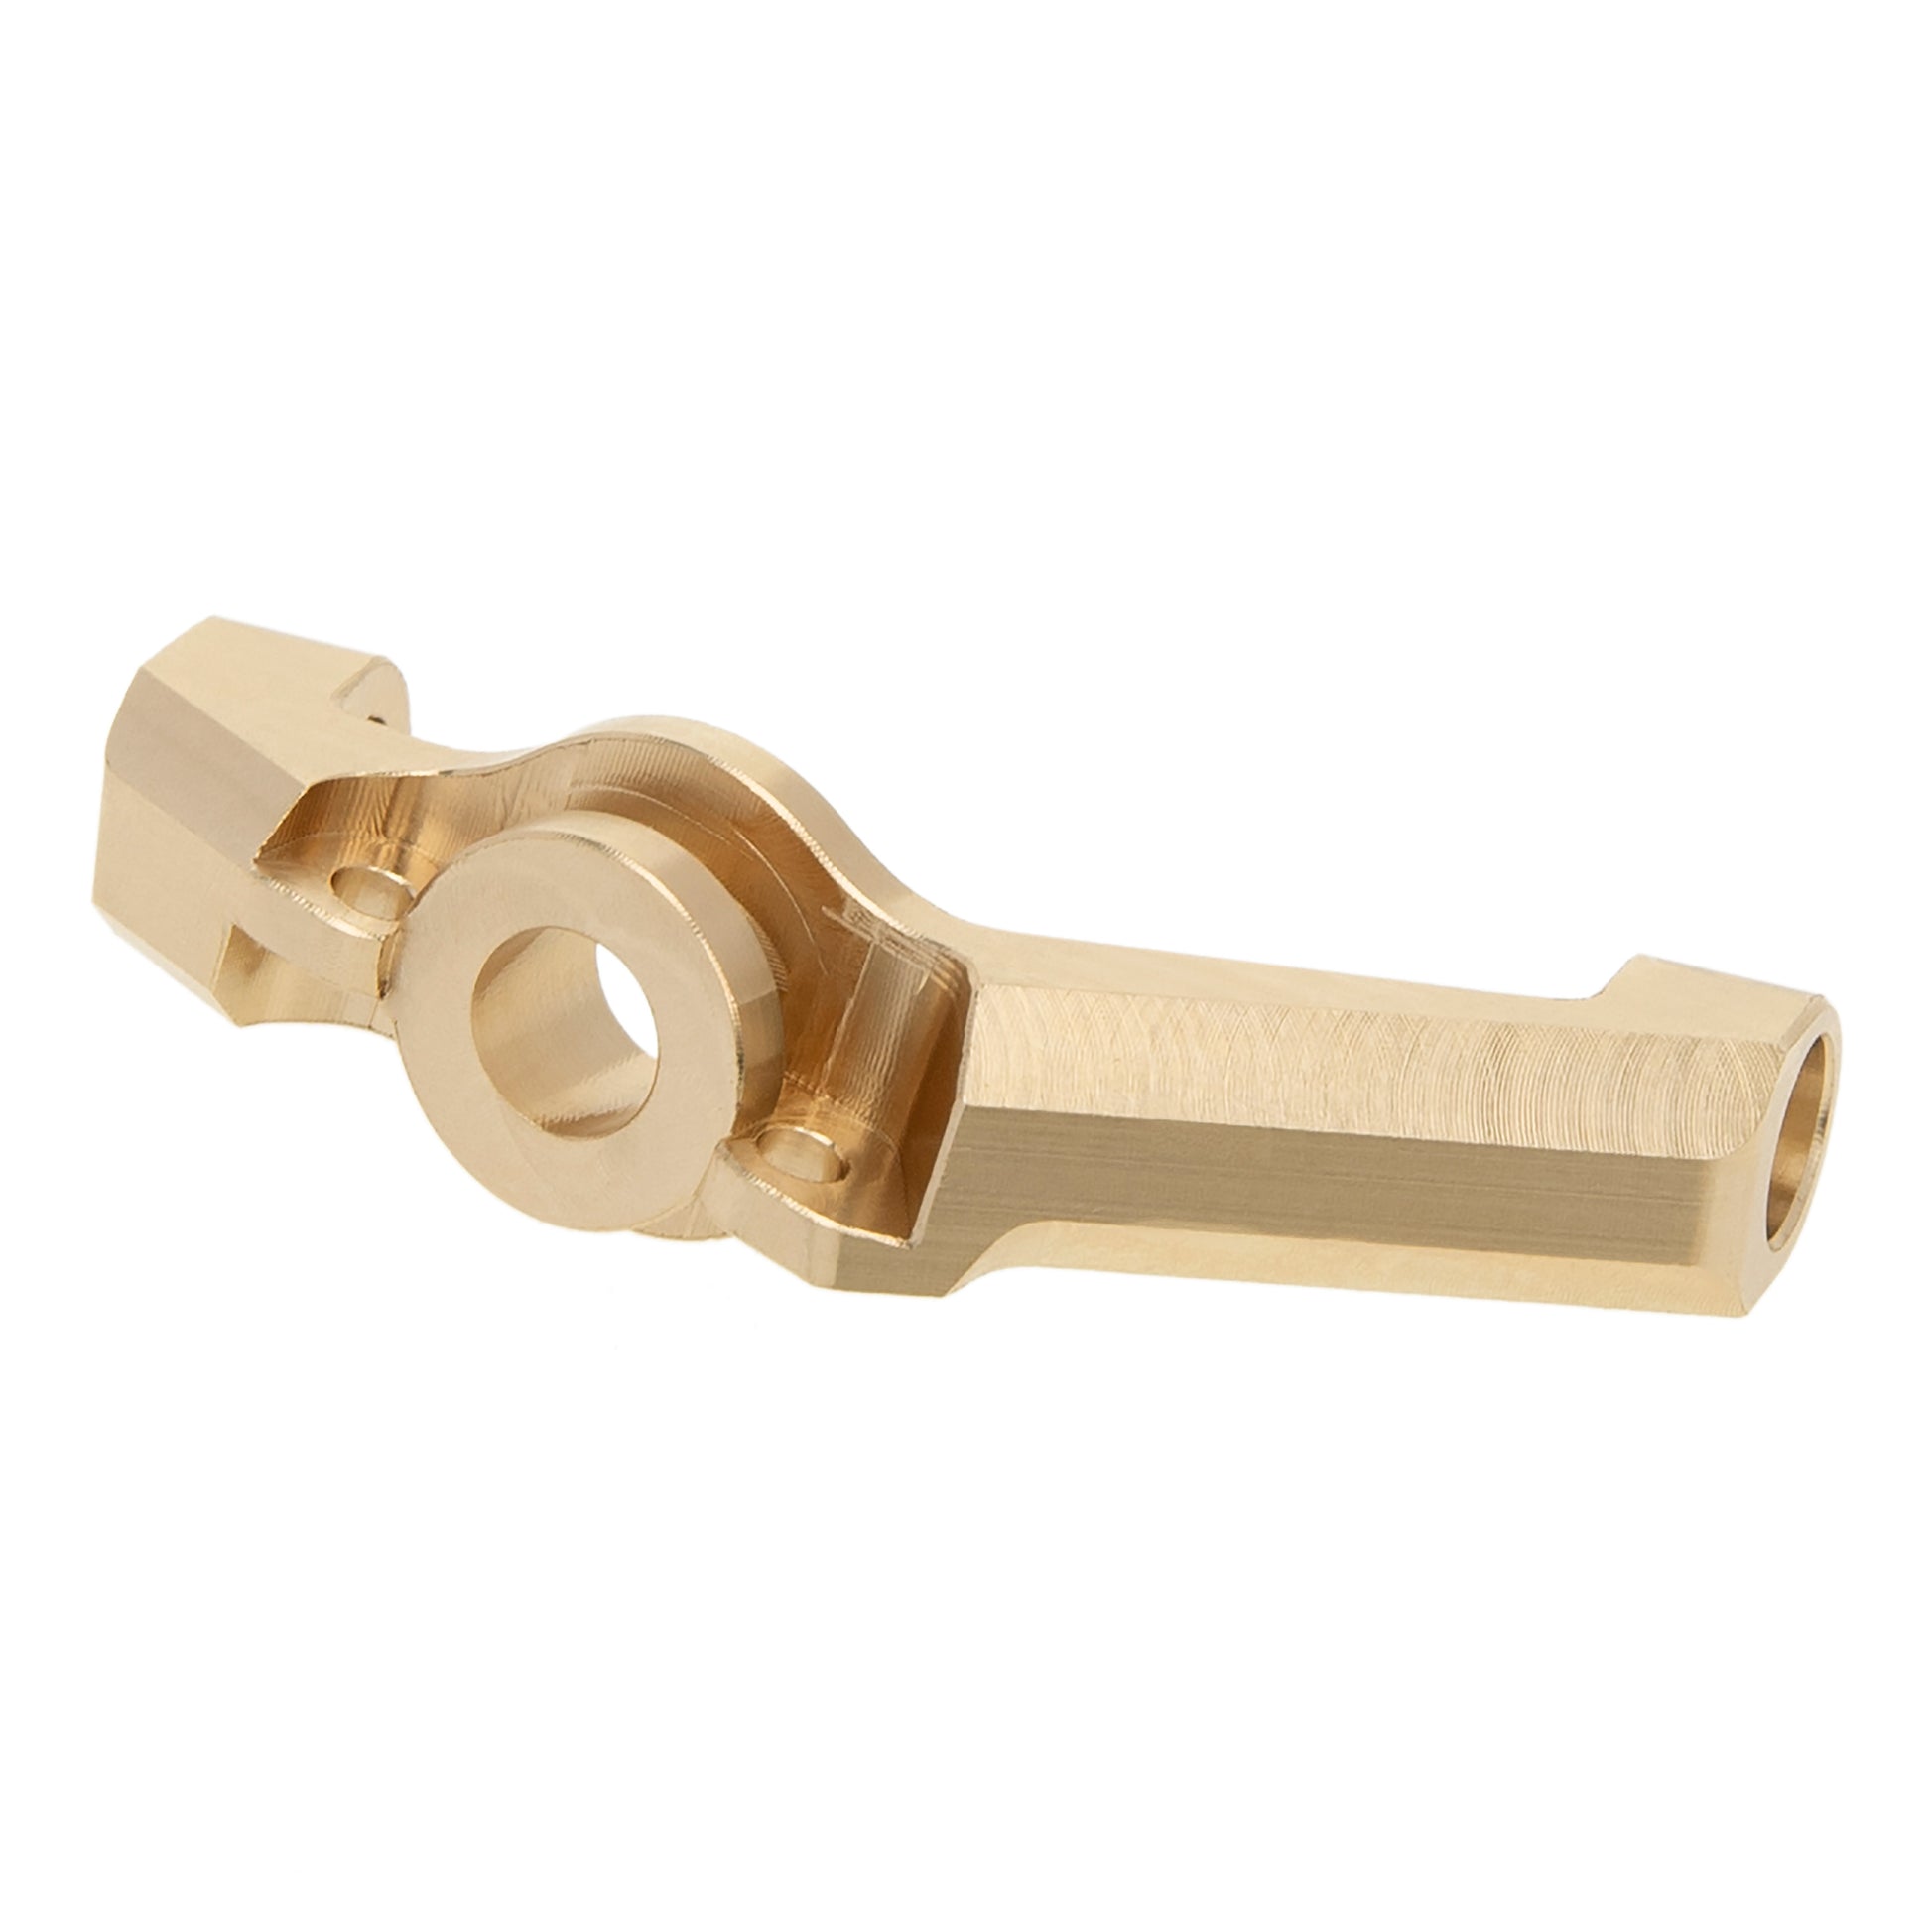 Gold Brass Caster Block C-Hub Carriers for UTB18